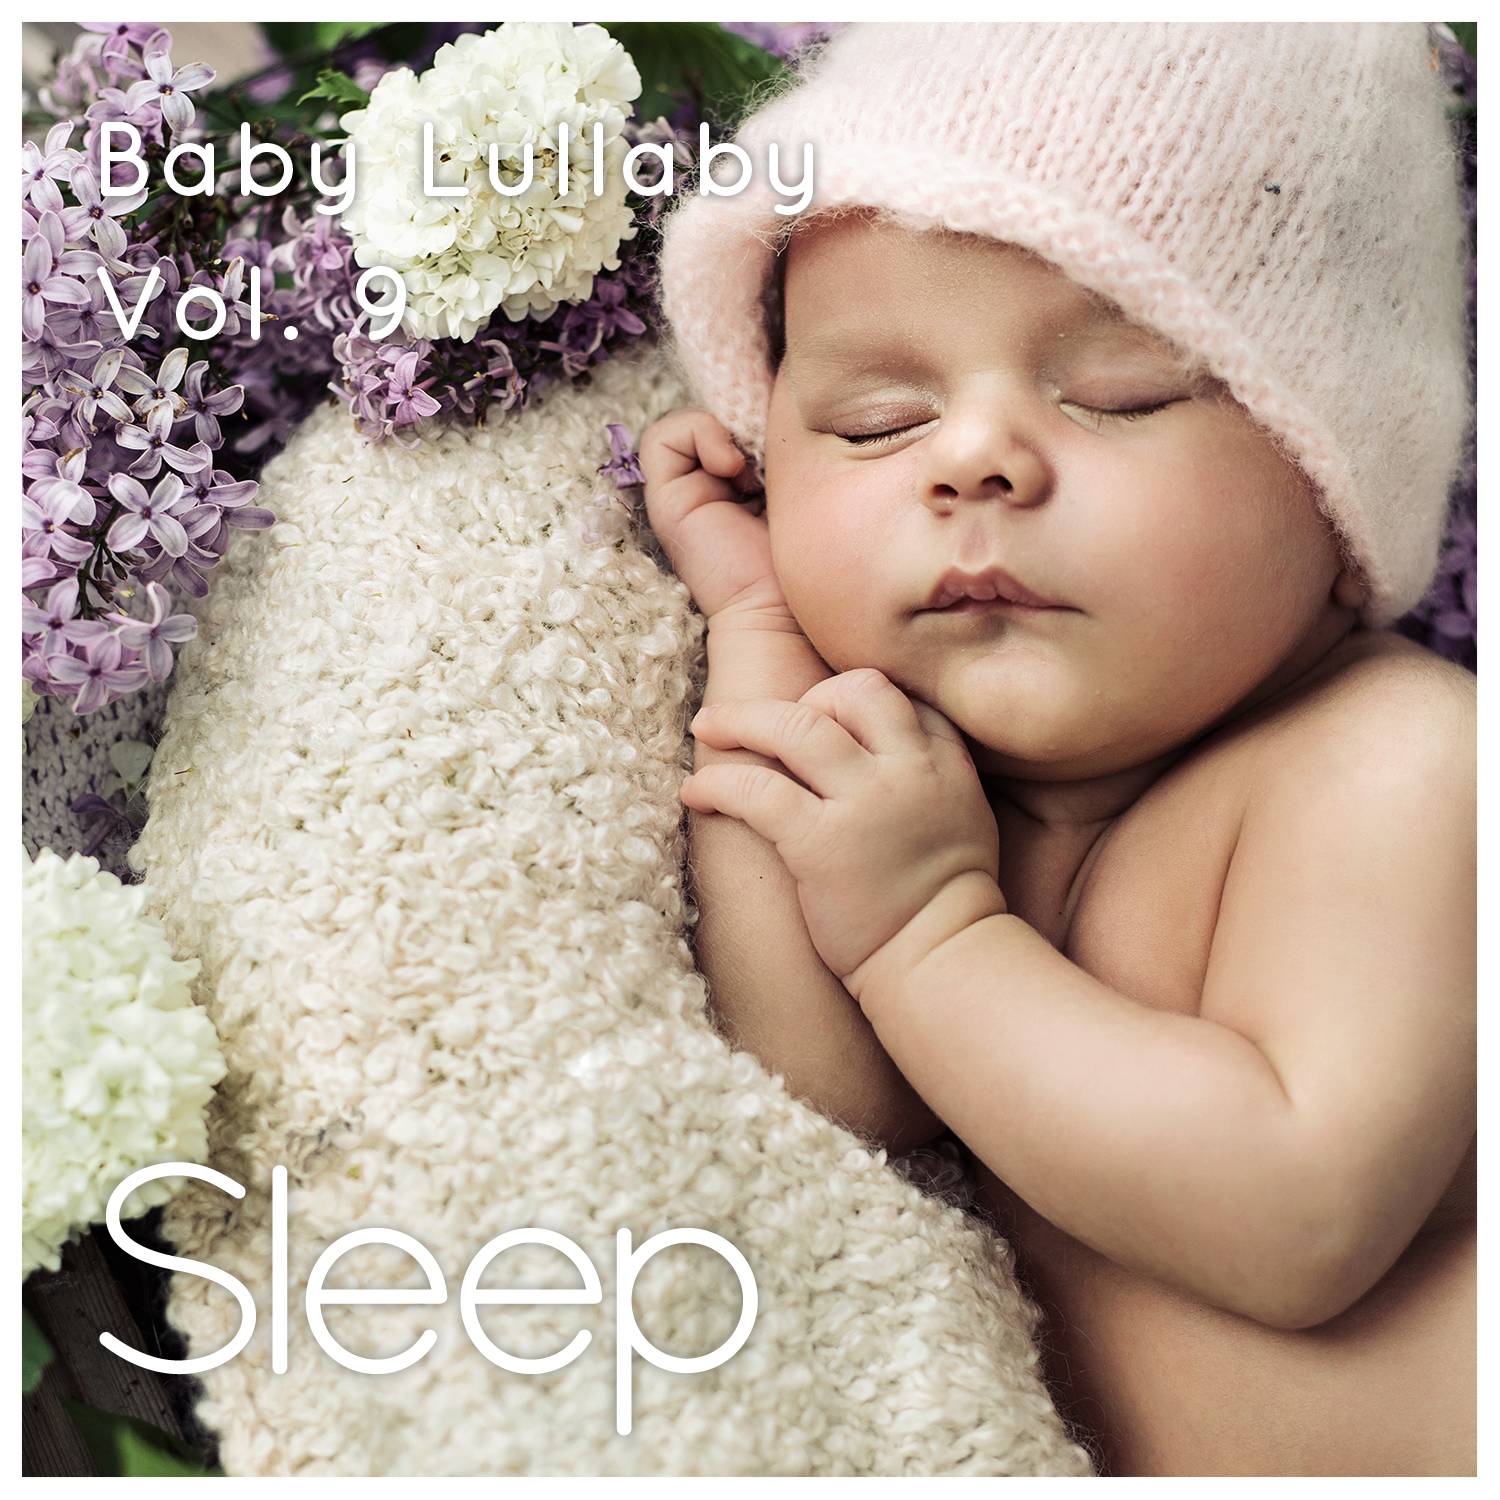 Baby Sleep Ambient Lullaby, Pt. 42